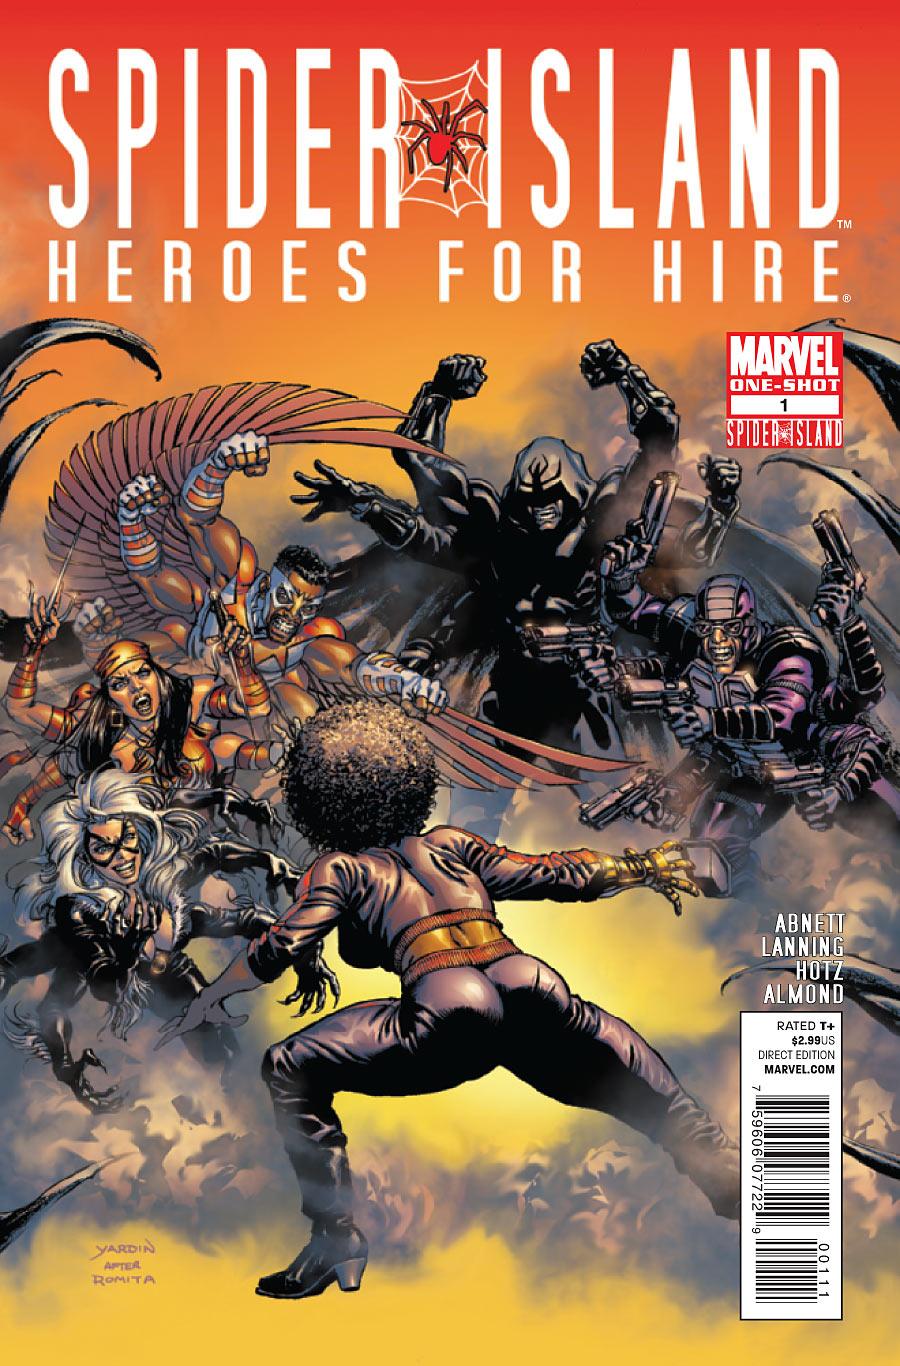 Spider-Island: Heroes for Hire Vol. 1 #1